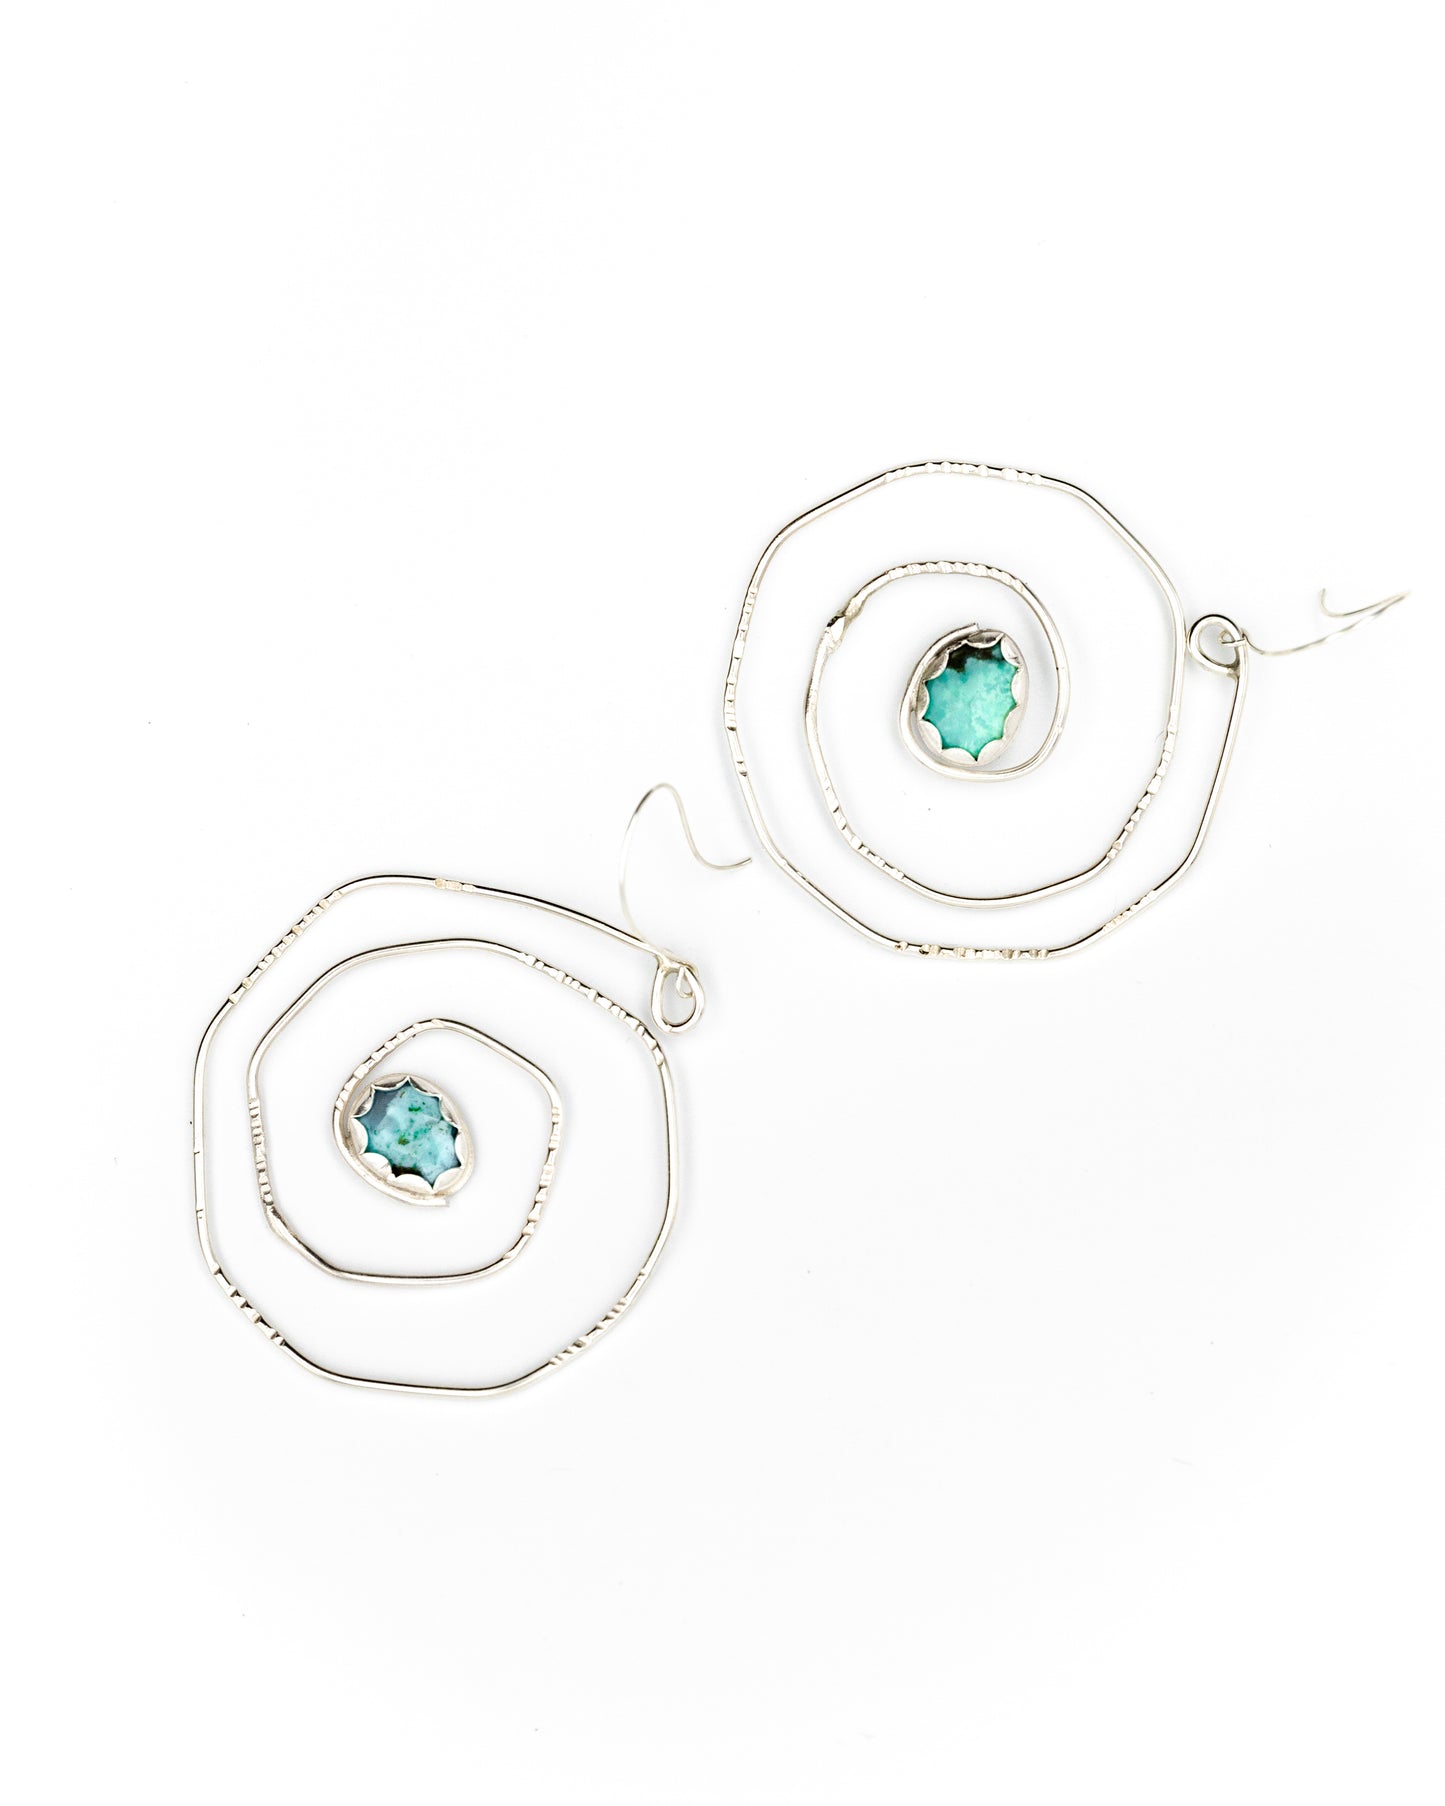 Swirl silver earrings with turquoise